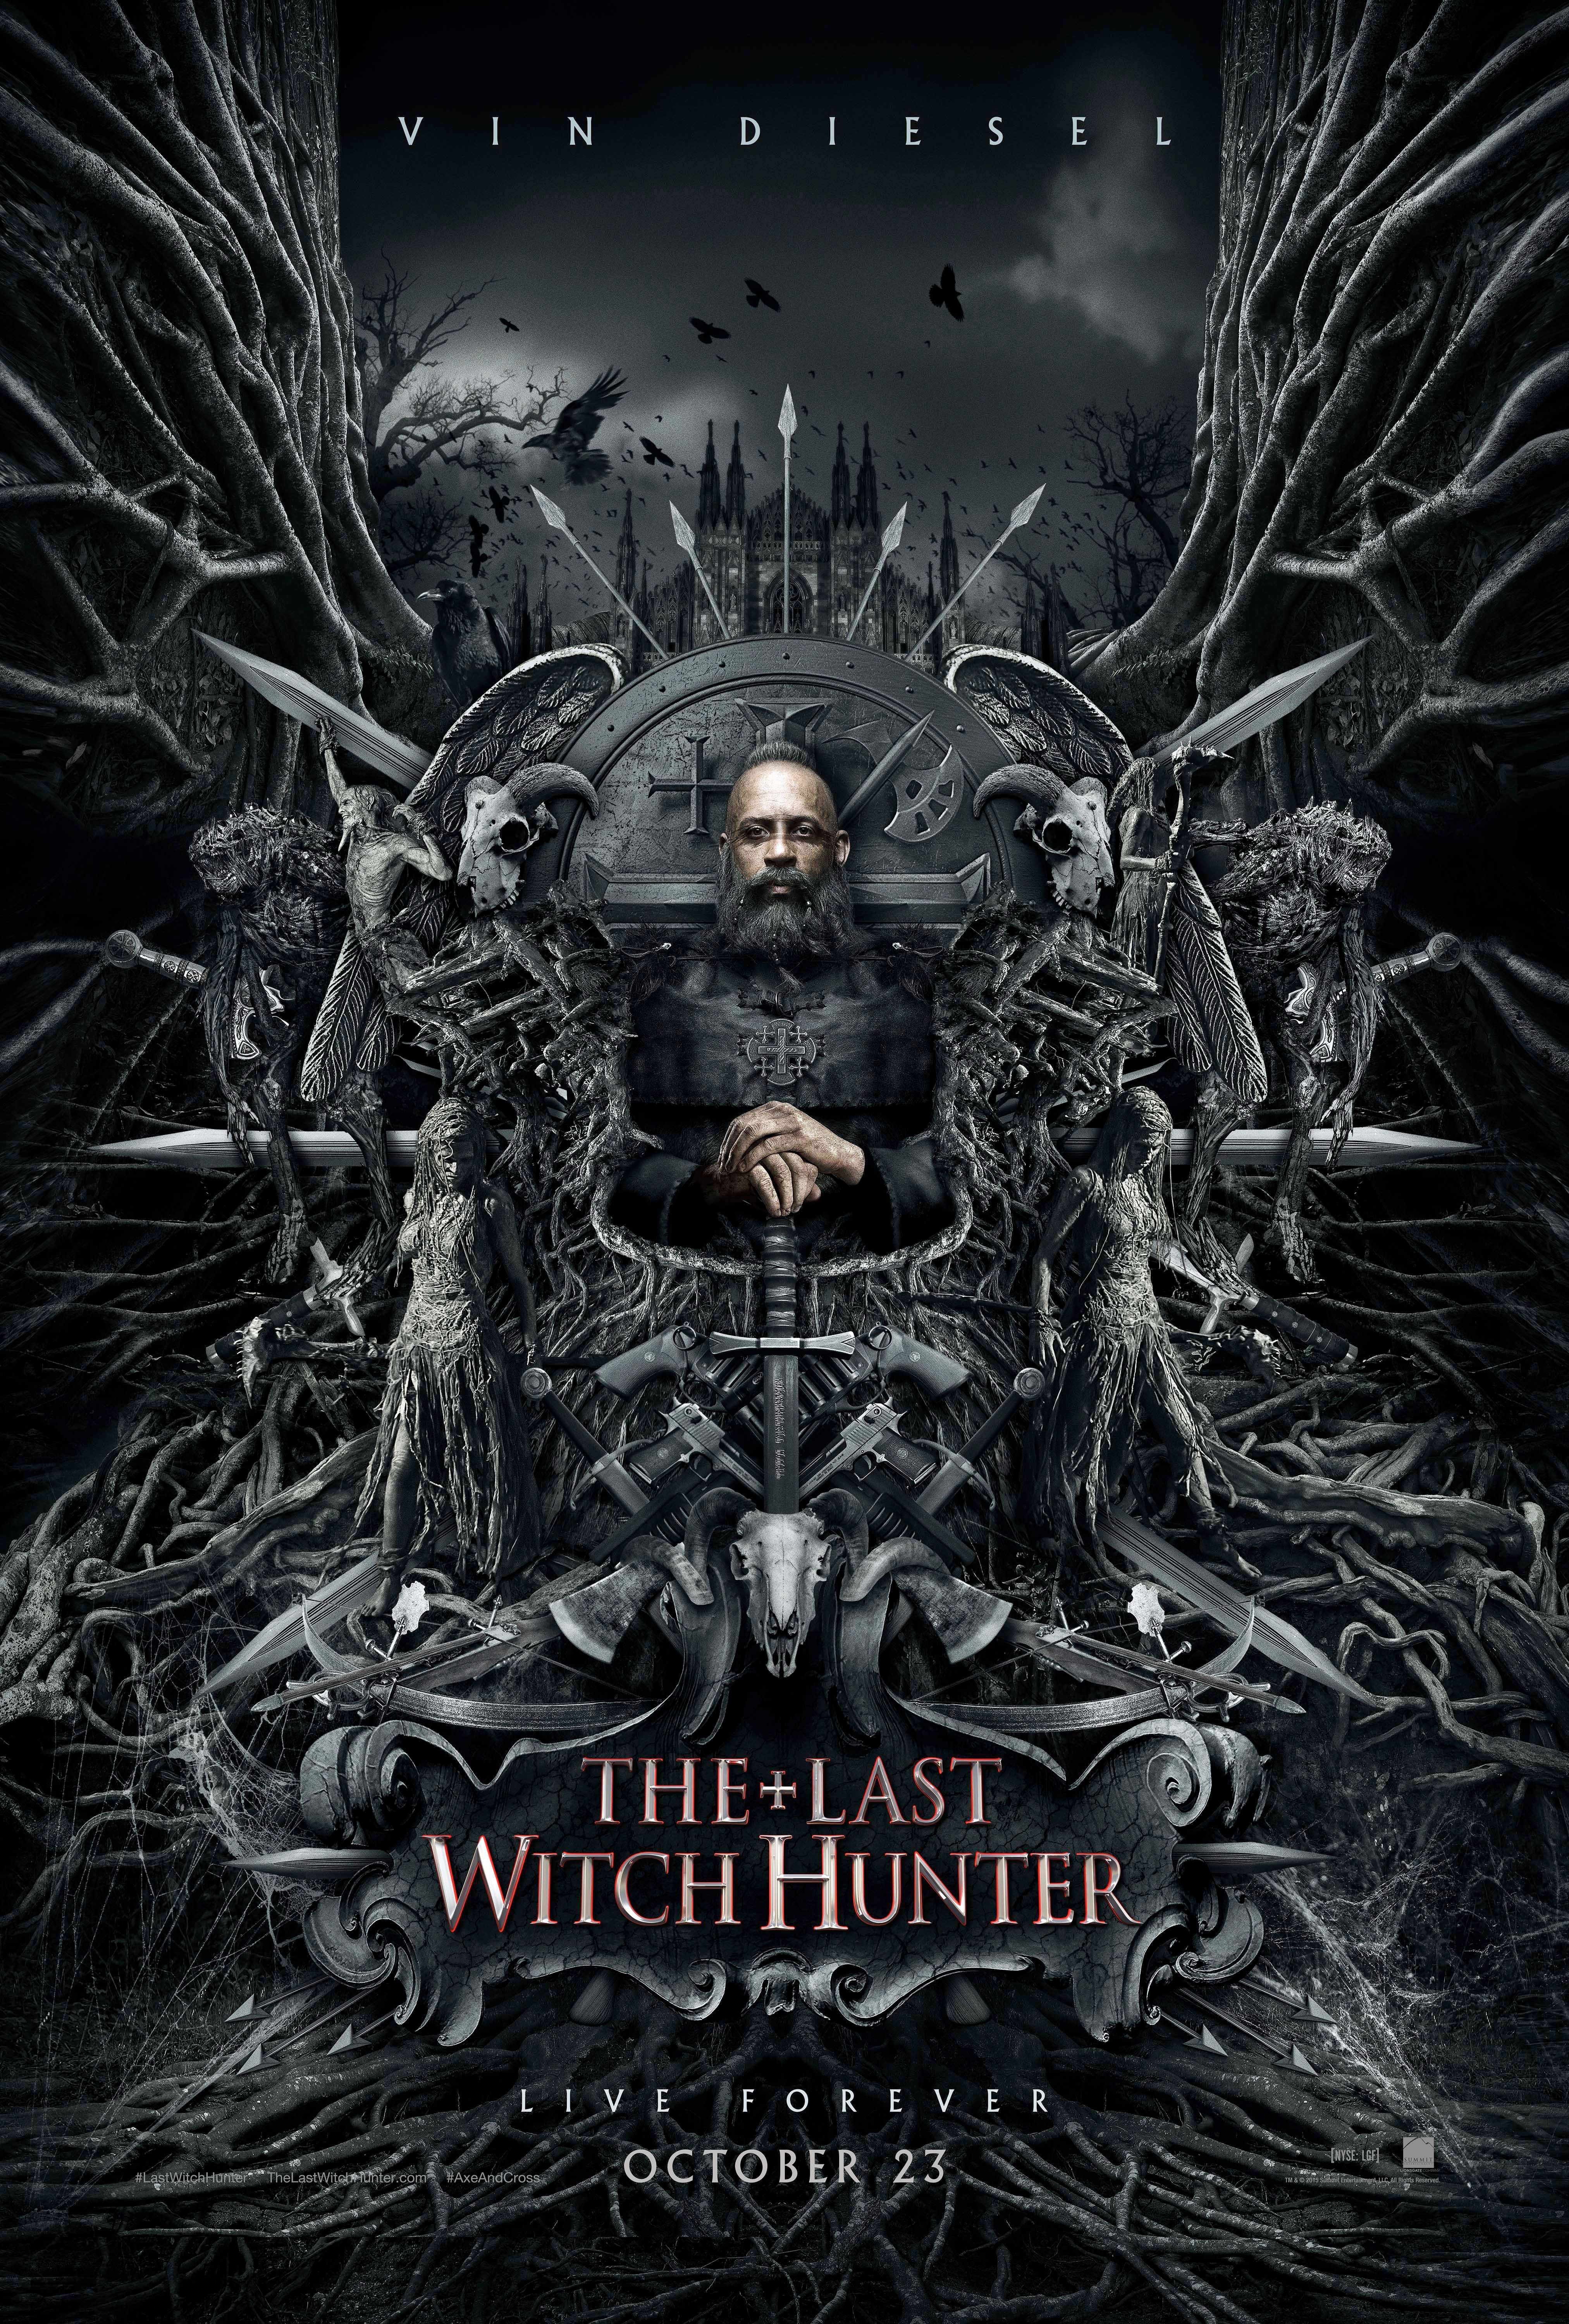 The Last Witch Hunter Comic-Con Poster 1